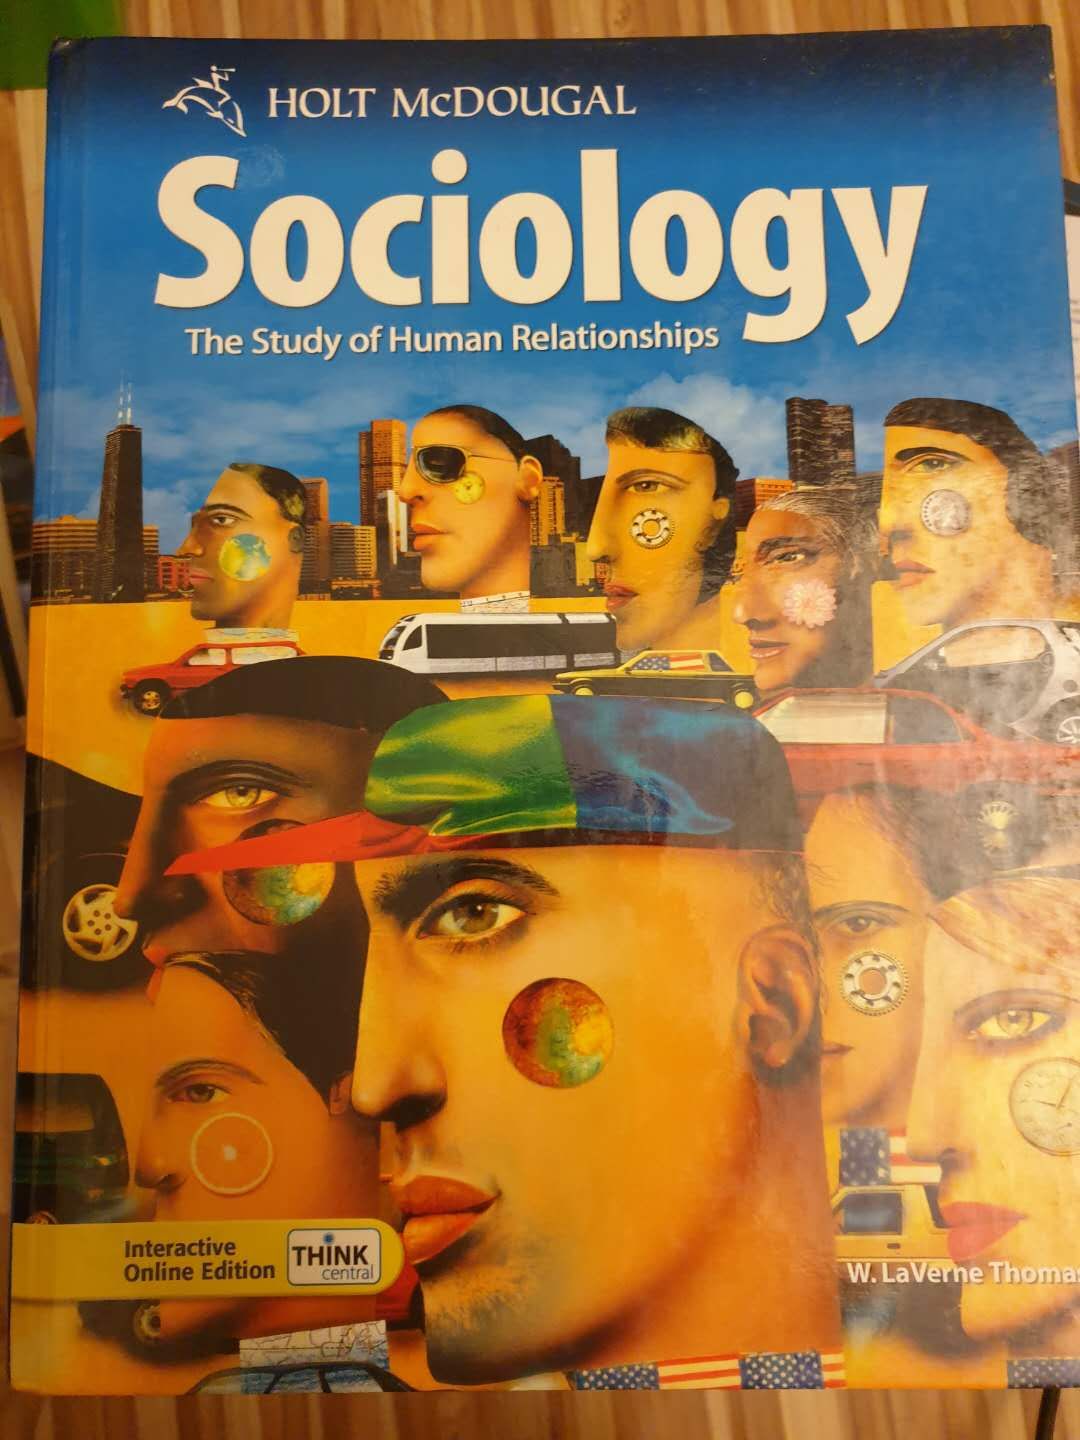 Sociology: The Study of Human Relationships 詳細資料